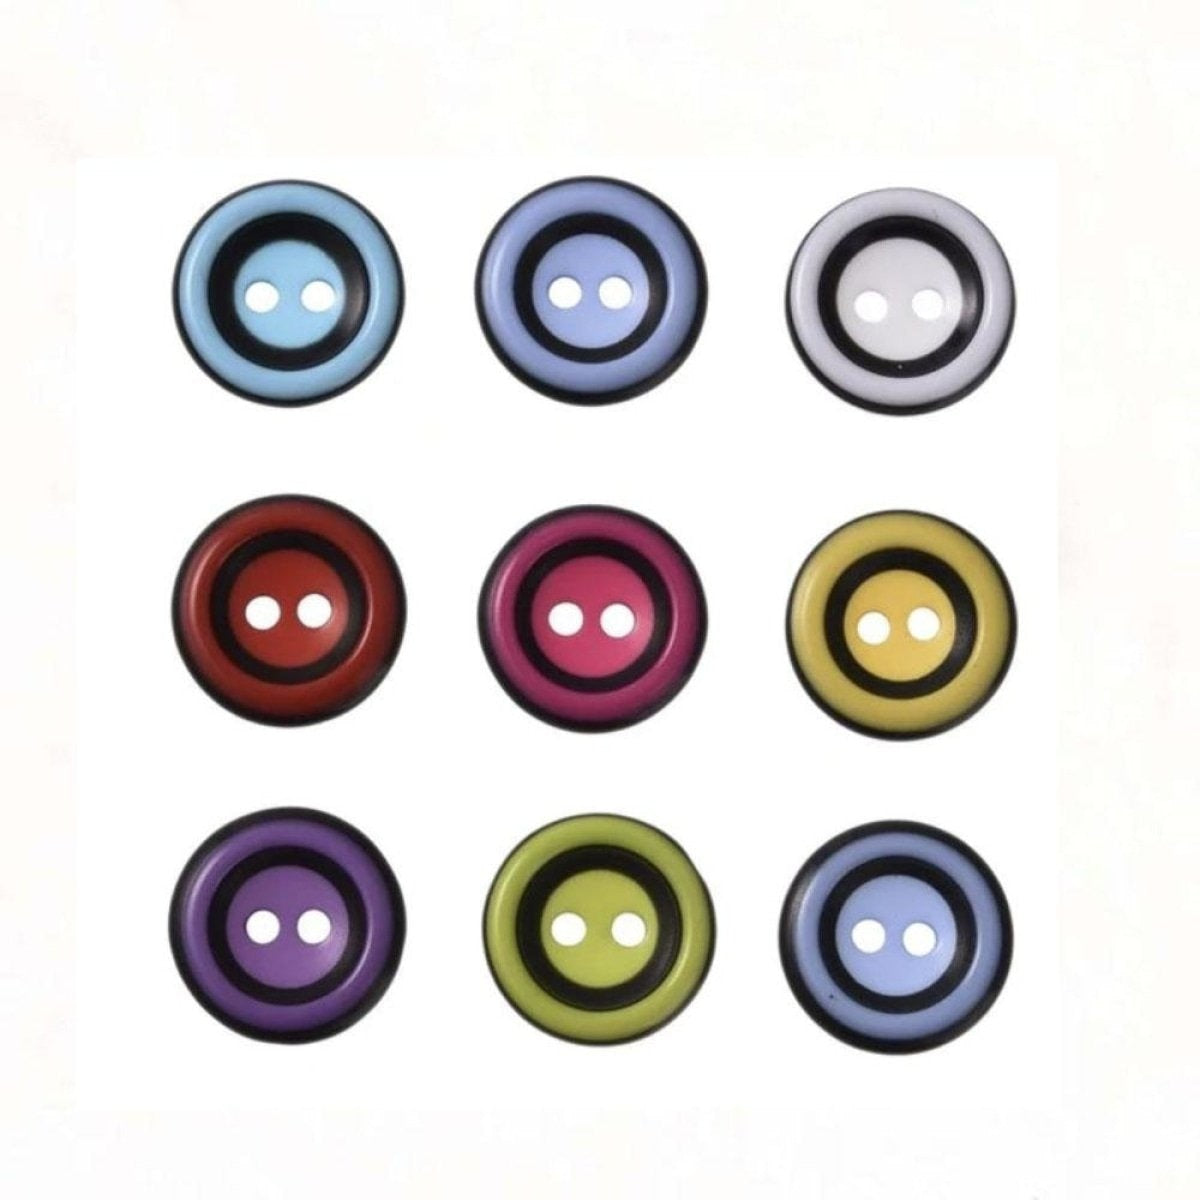 100pcs 18mm Round Resin Buttons Sewing Colourful Button DIY Decorative